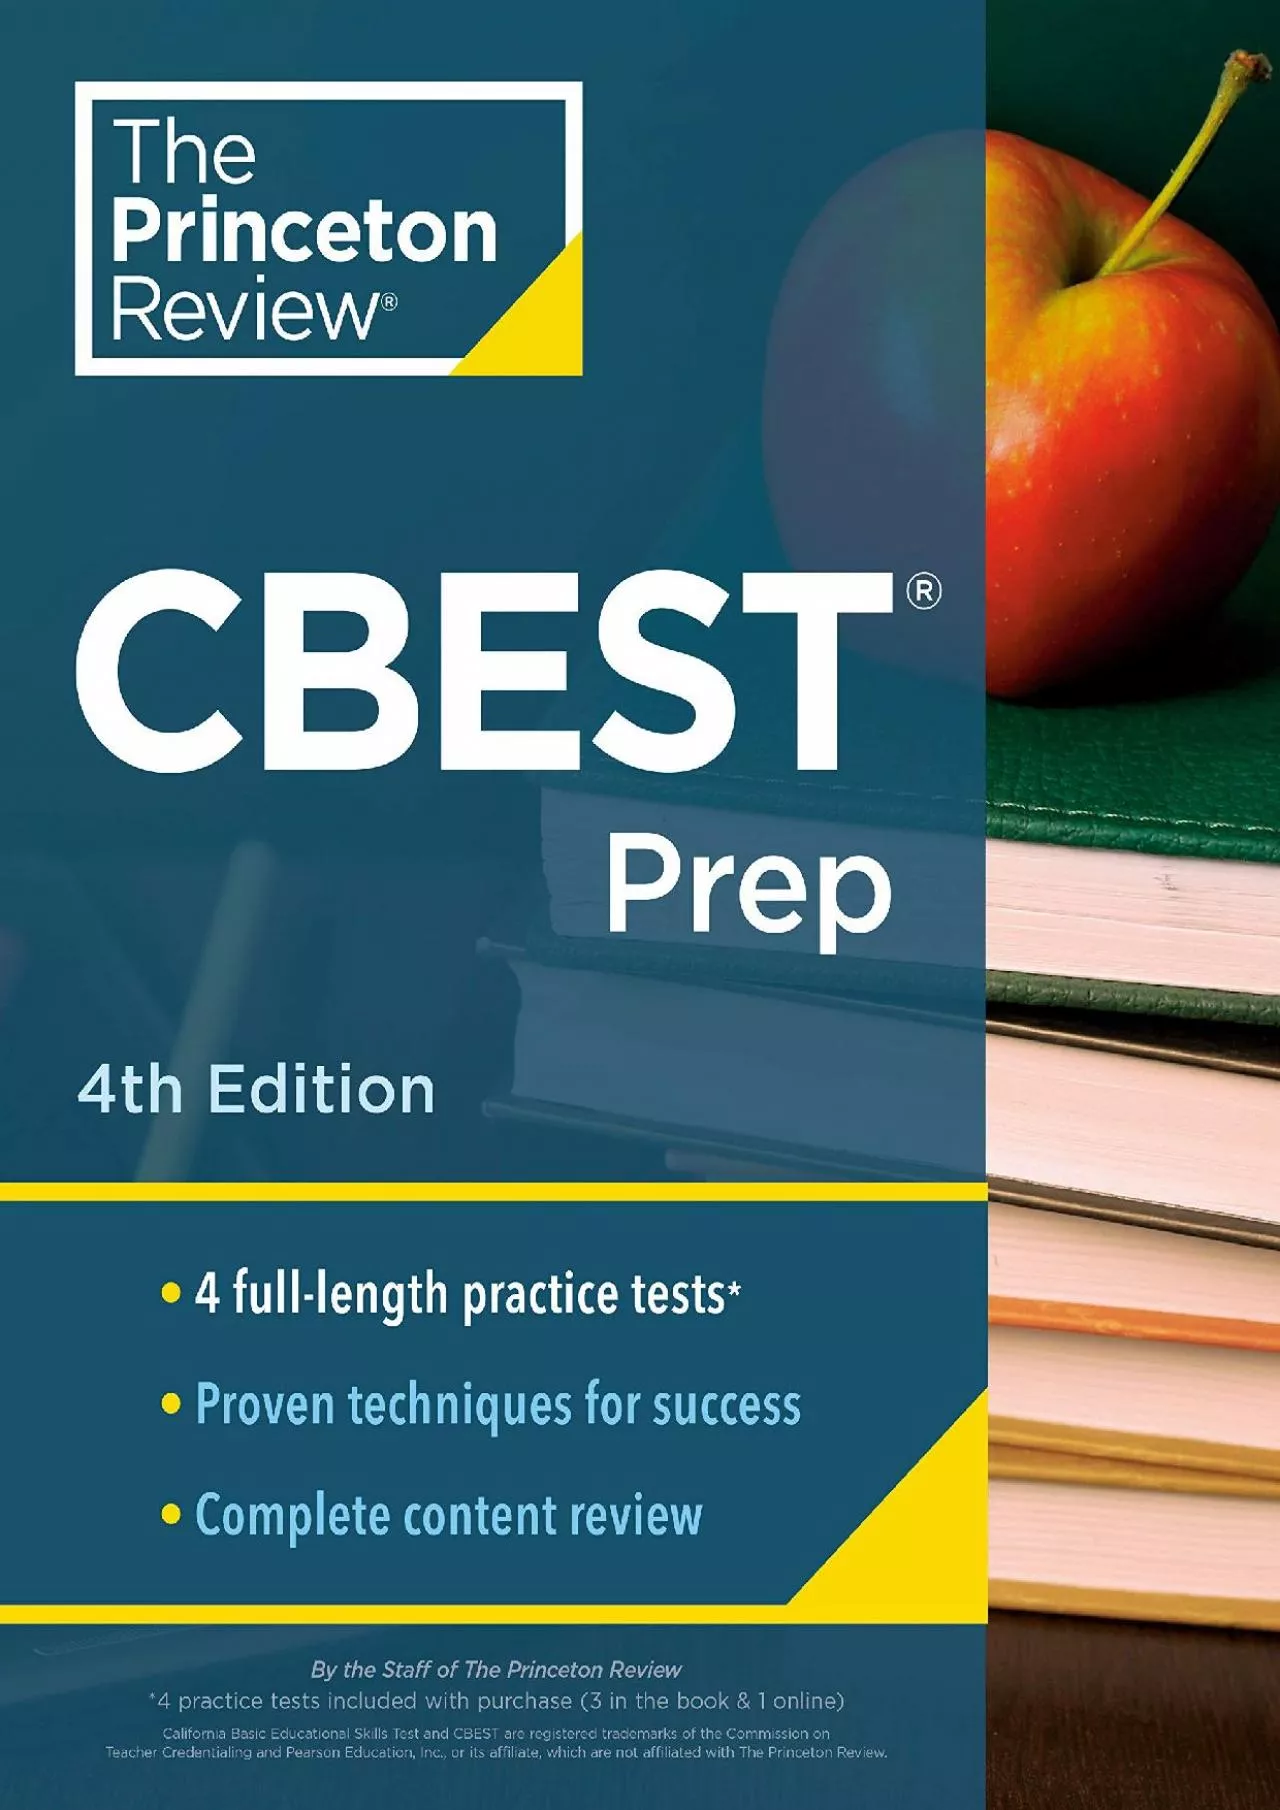 [DOWNLOAD] Princeton Review CBEST Prep, 4th Edition: 3 Practice Tests + Content Review